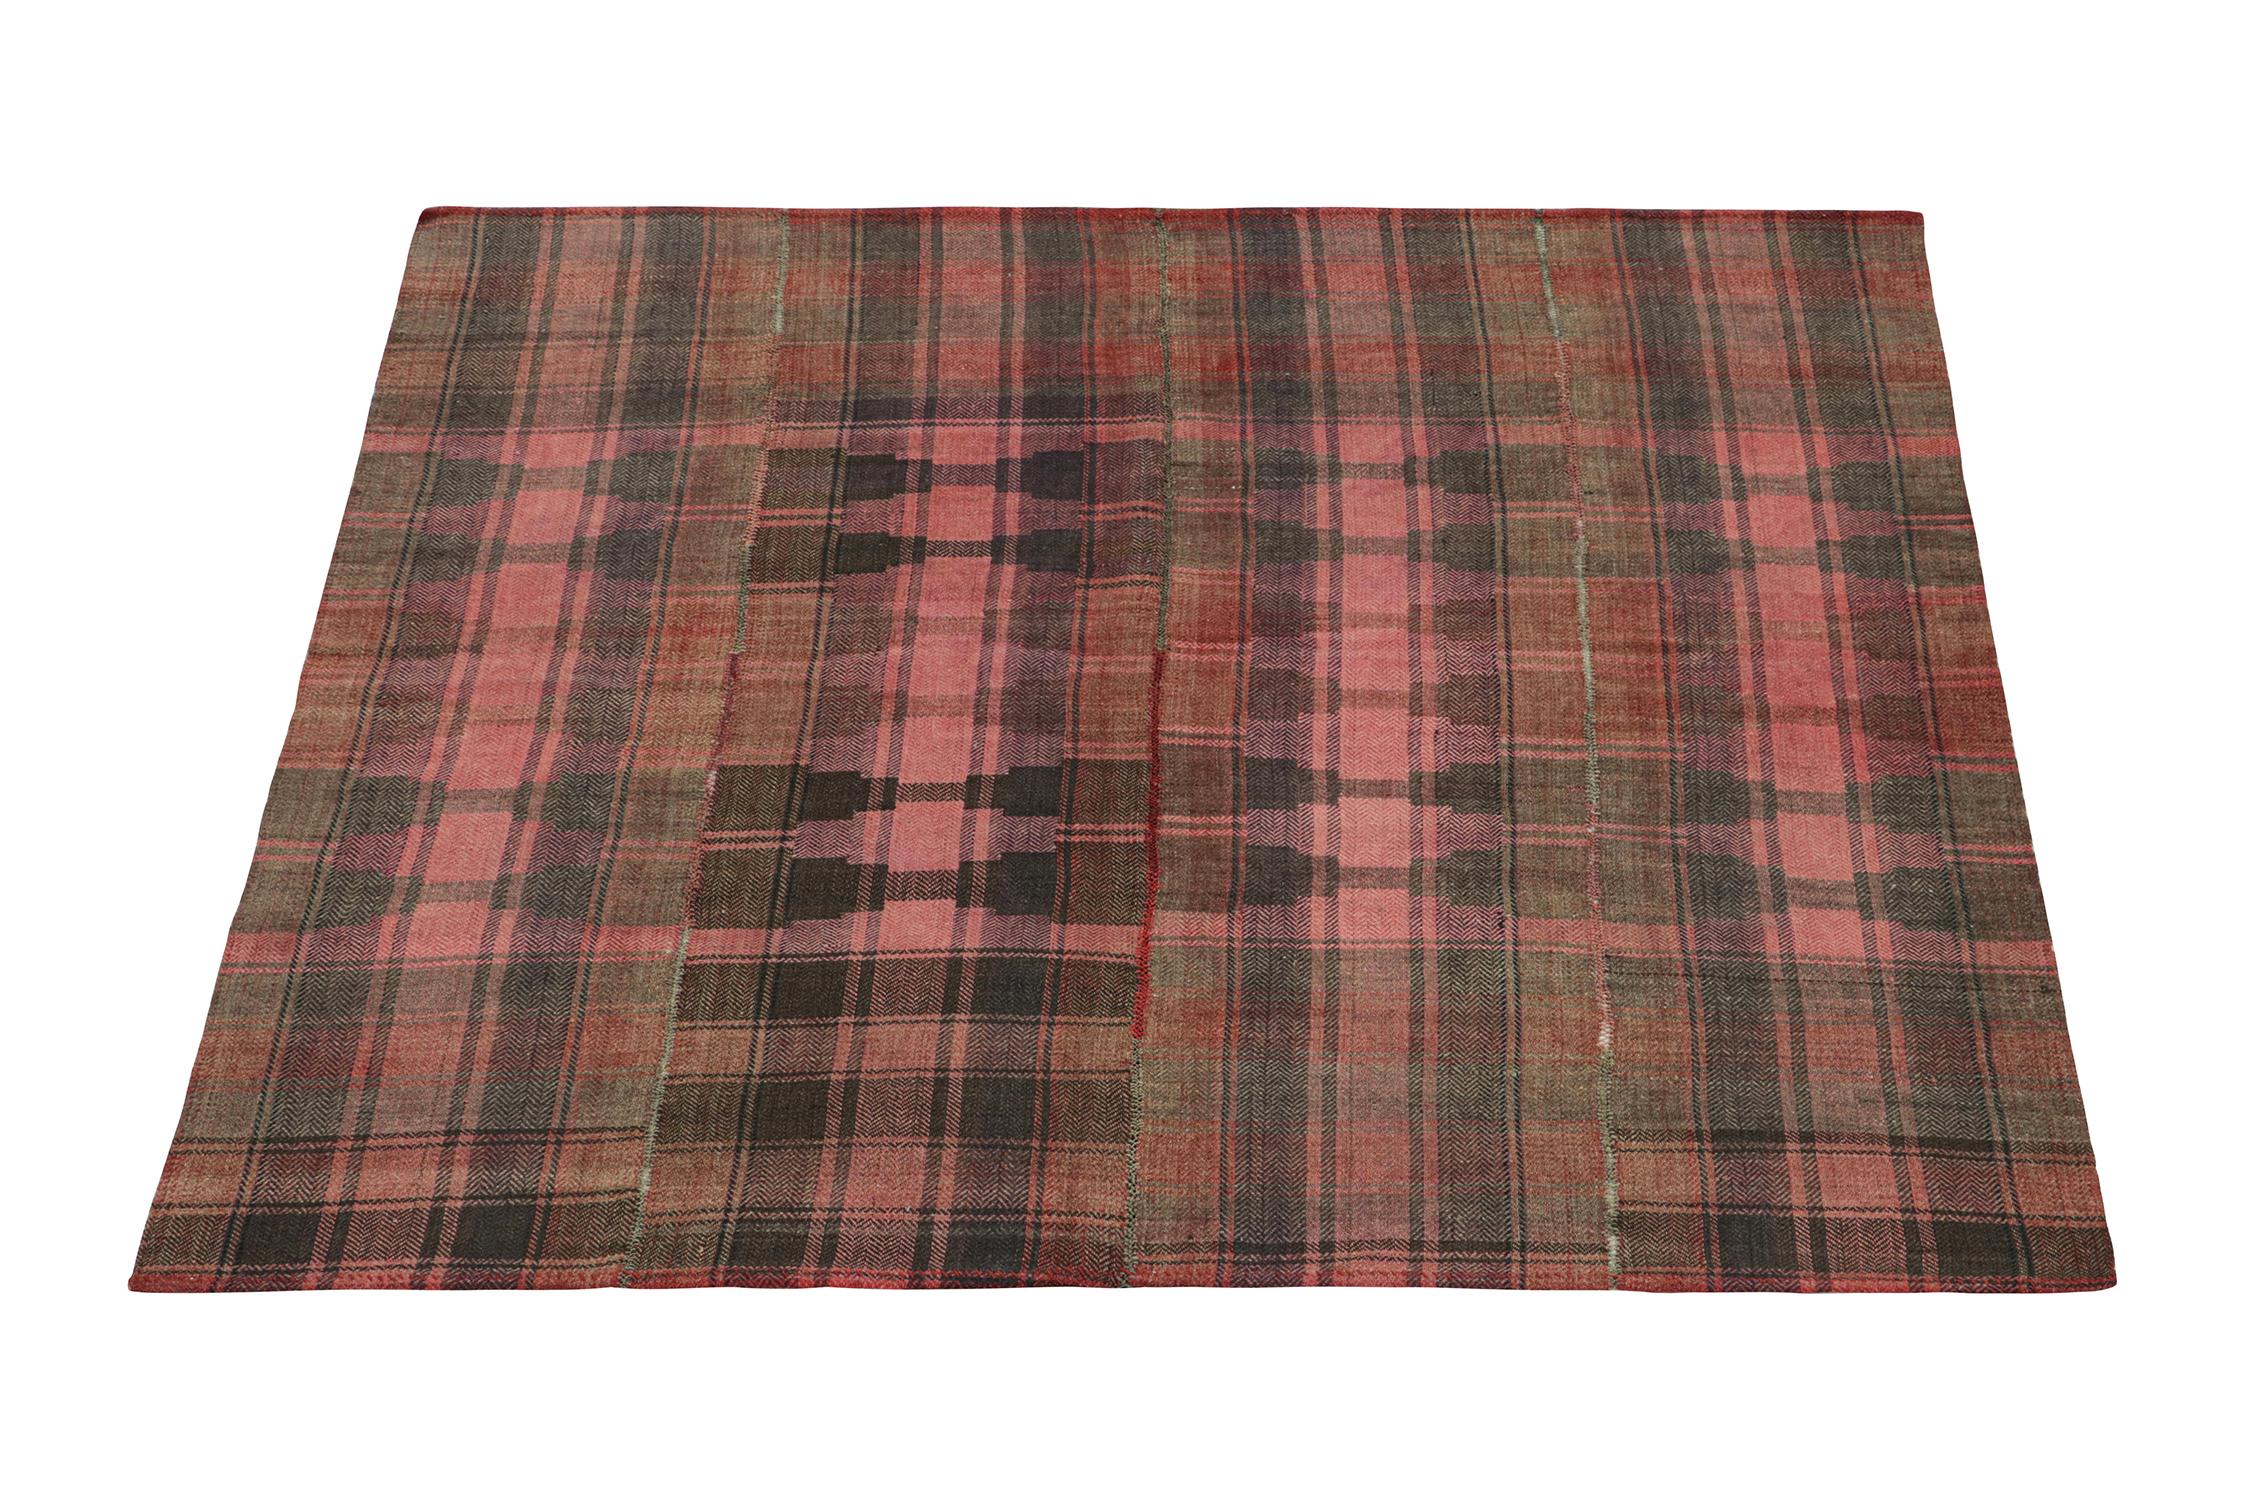 This vintage 5x6 Jajim kilim is believed to be a Kurdish tribal rug. Handwoven in wool, it originates circa 1950-1960. 

Further on the Design:

The design prefers geometric patterns in a vibrant pink with rich brown accents and red undertones. It’s